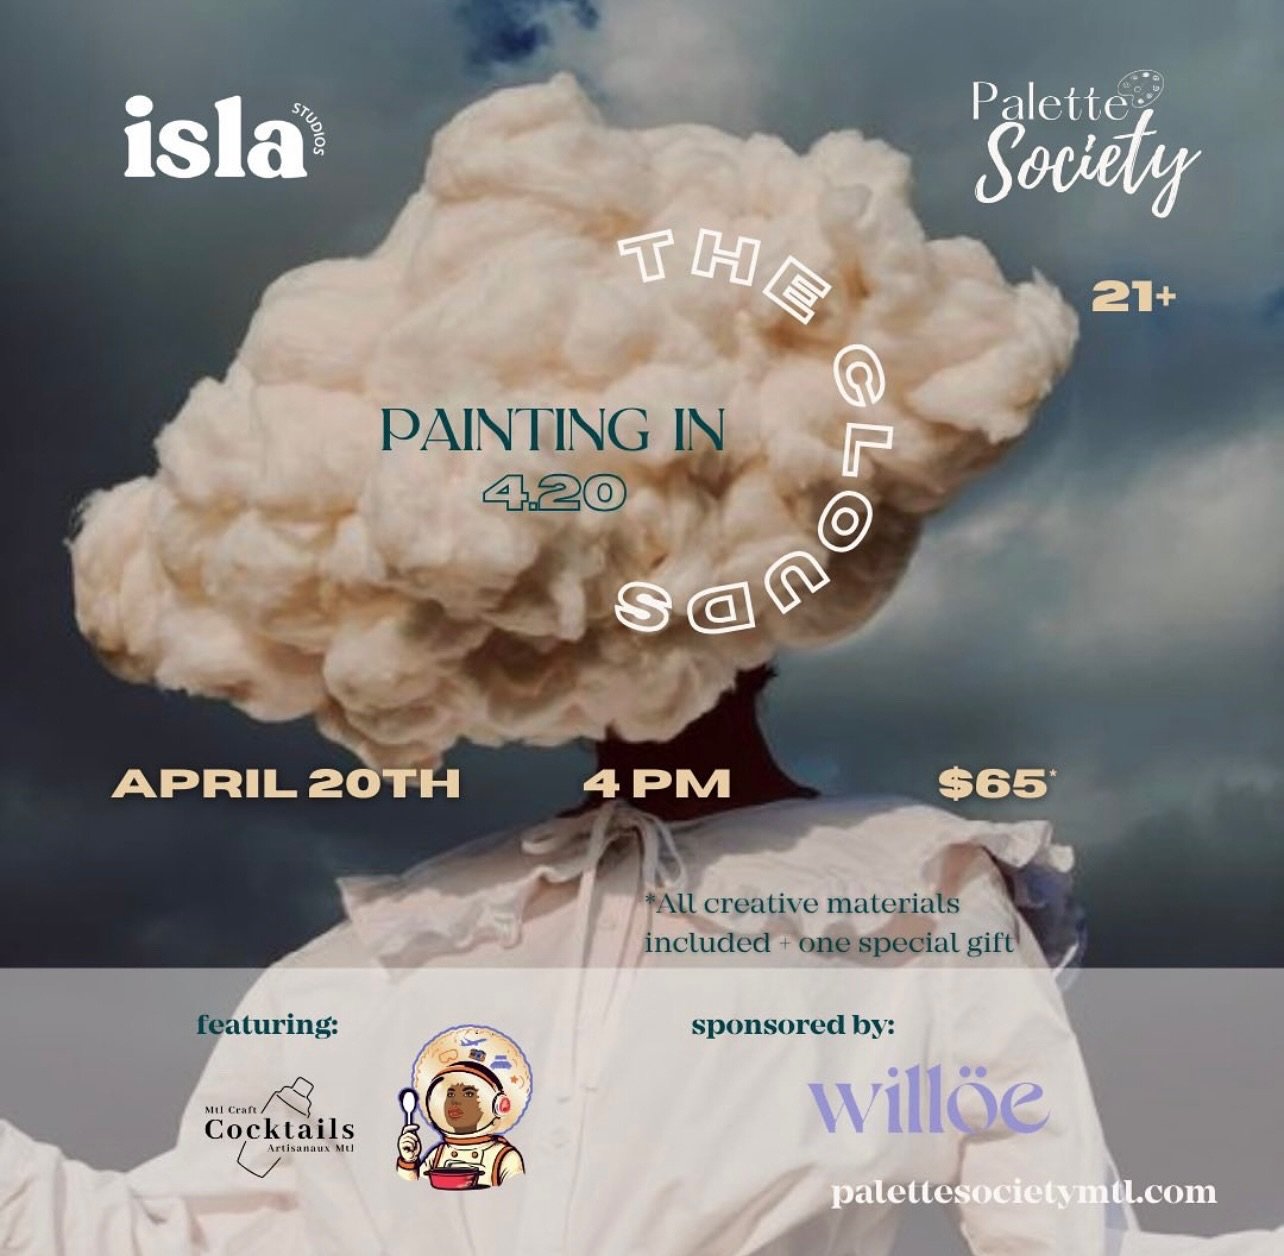 Join Palette Society Mtl and Isla Studios for a uniquely elevated painting experience at
&ldquo;Painting in the Clouds&rdquo;.
Let your creativity soar as you indulge in an evening of freehand painting guided by an artist.

Sponsored by @willoegin an